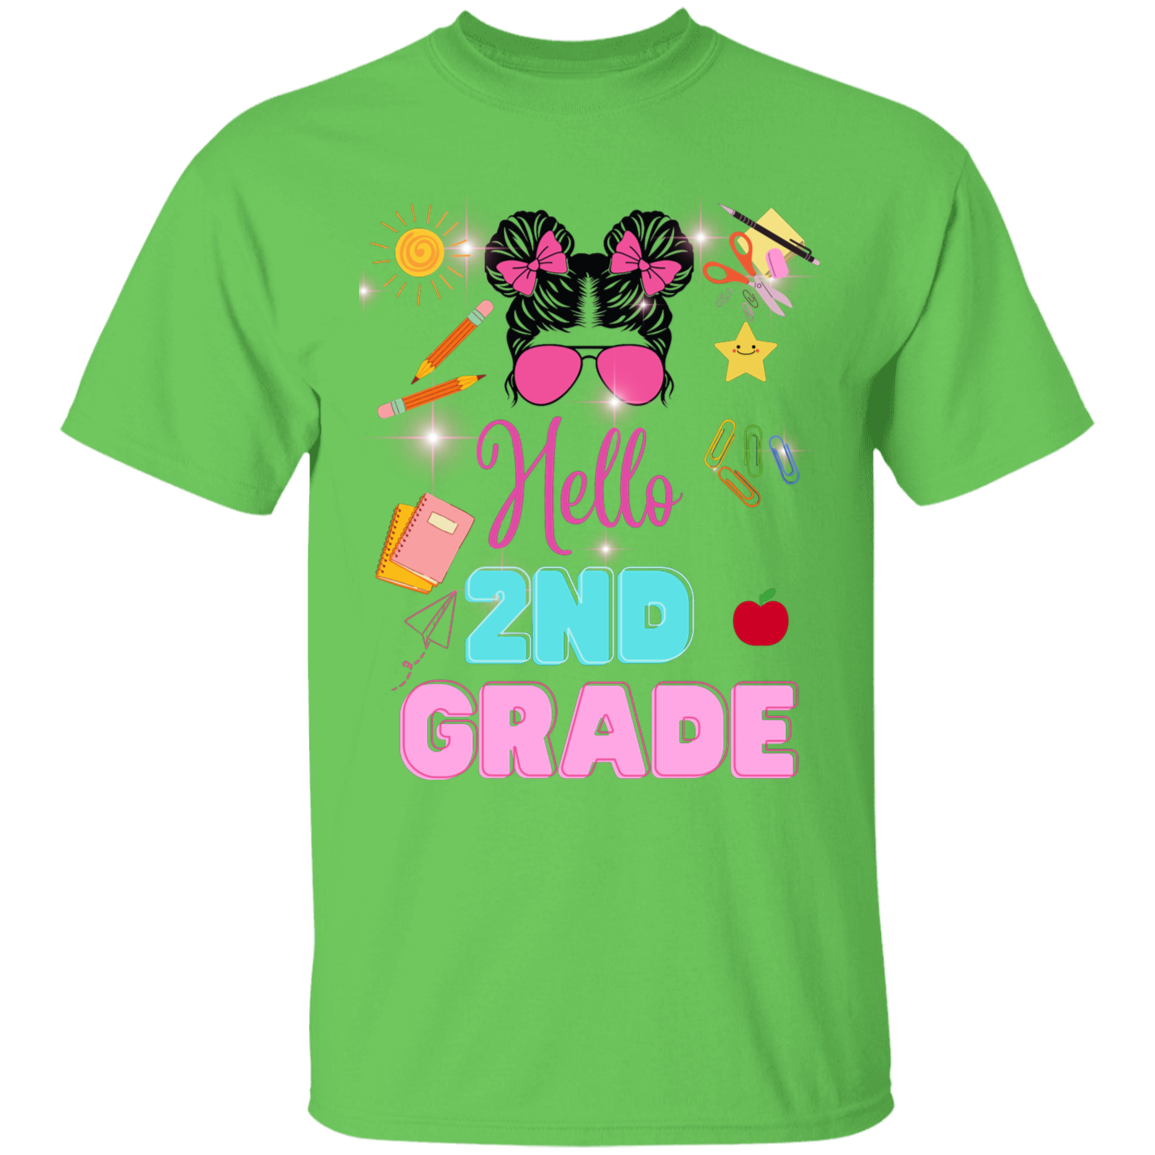 youth Back-to-school graphic tees 100% Cotton T-Shirt